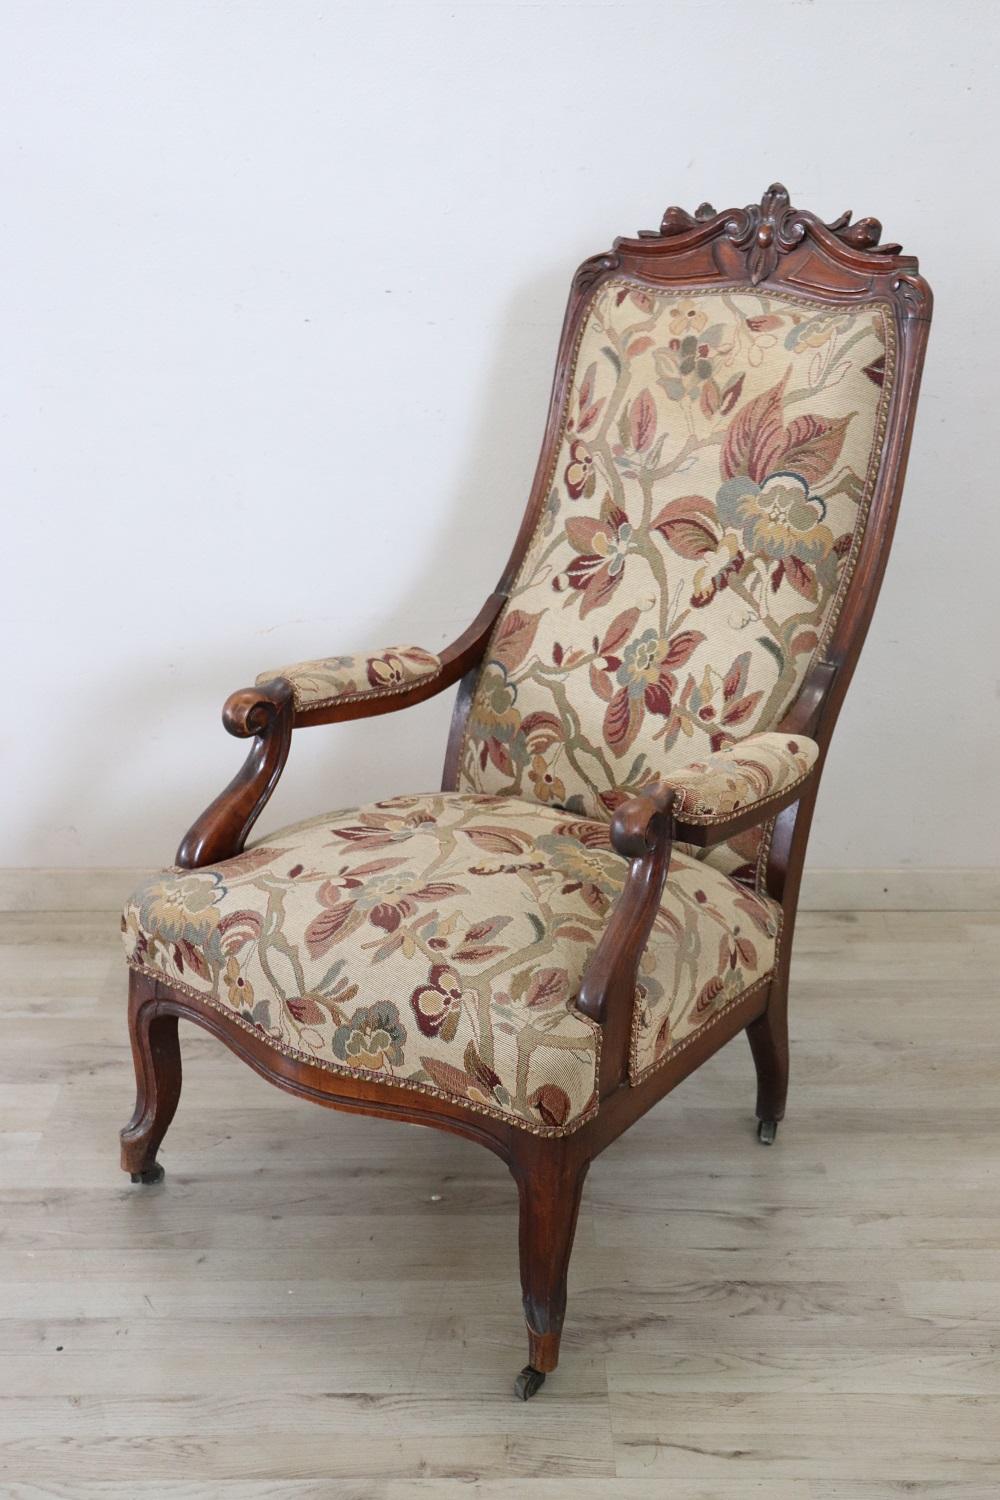 Lovely Italian antique armchair in solid walnut. This beautiful armchair has an enveloping shape and a comfortable seat. The enveloping and relaxing backrest. Padding and wood in perfect condition but defects in the fabric, stains and a small hole